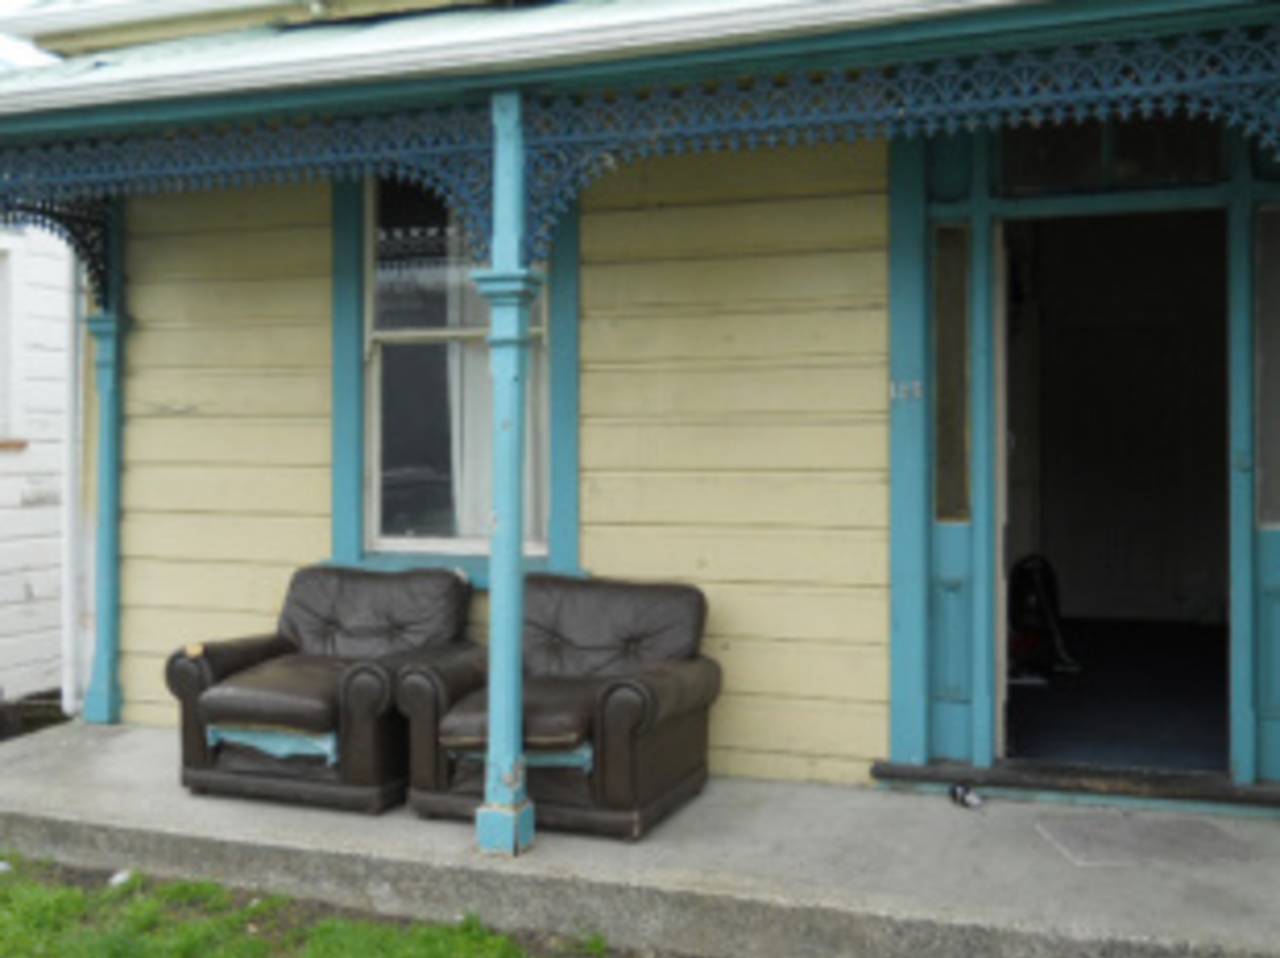 A couch outside a student house, Dunedin, March 5, 2012